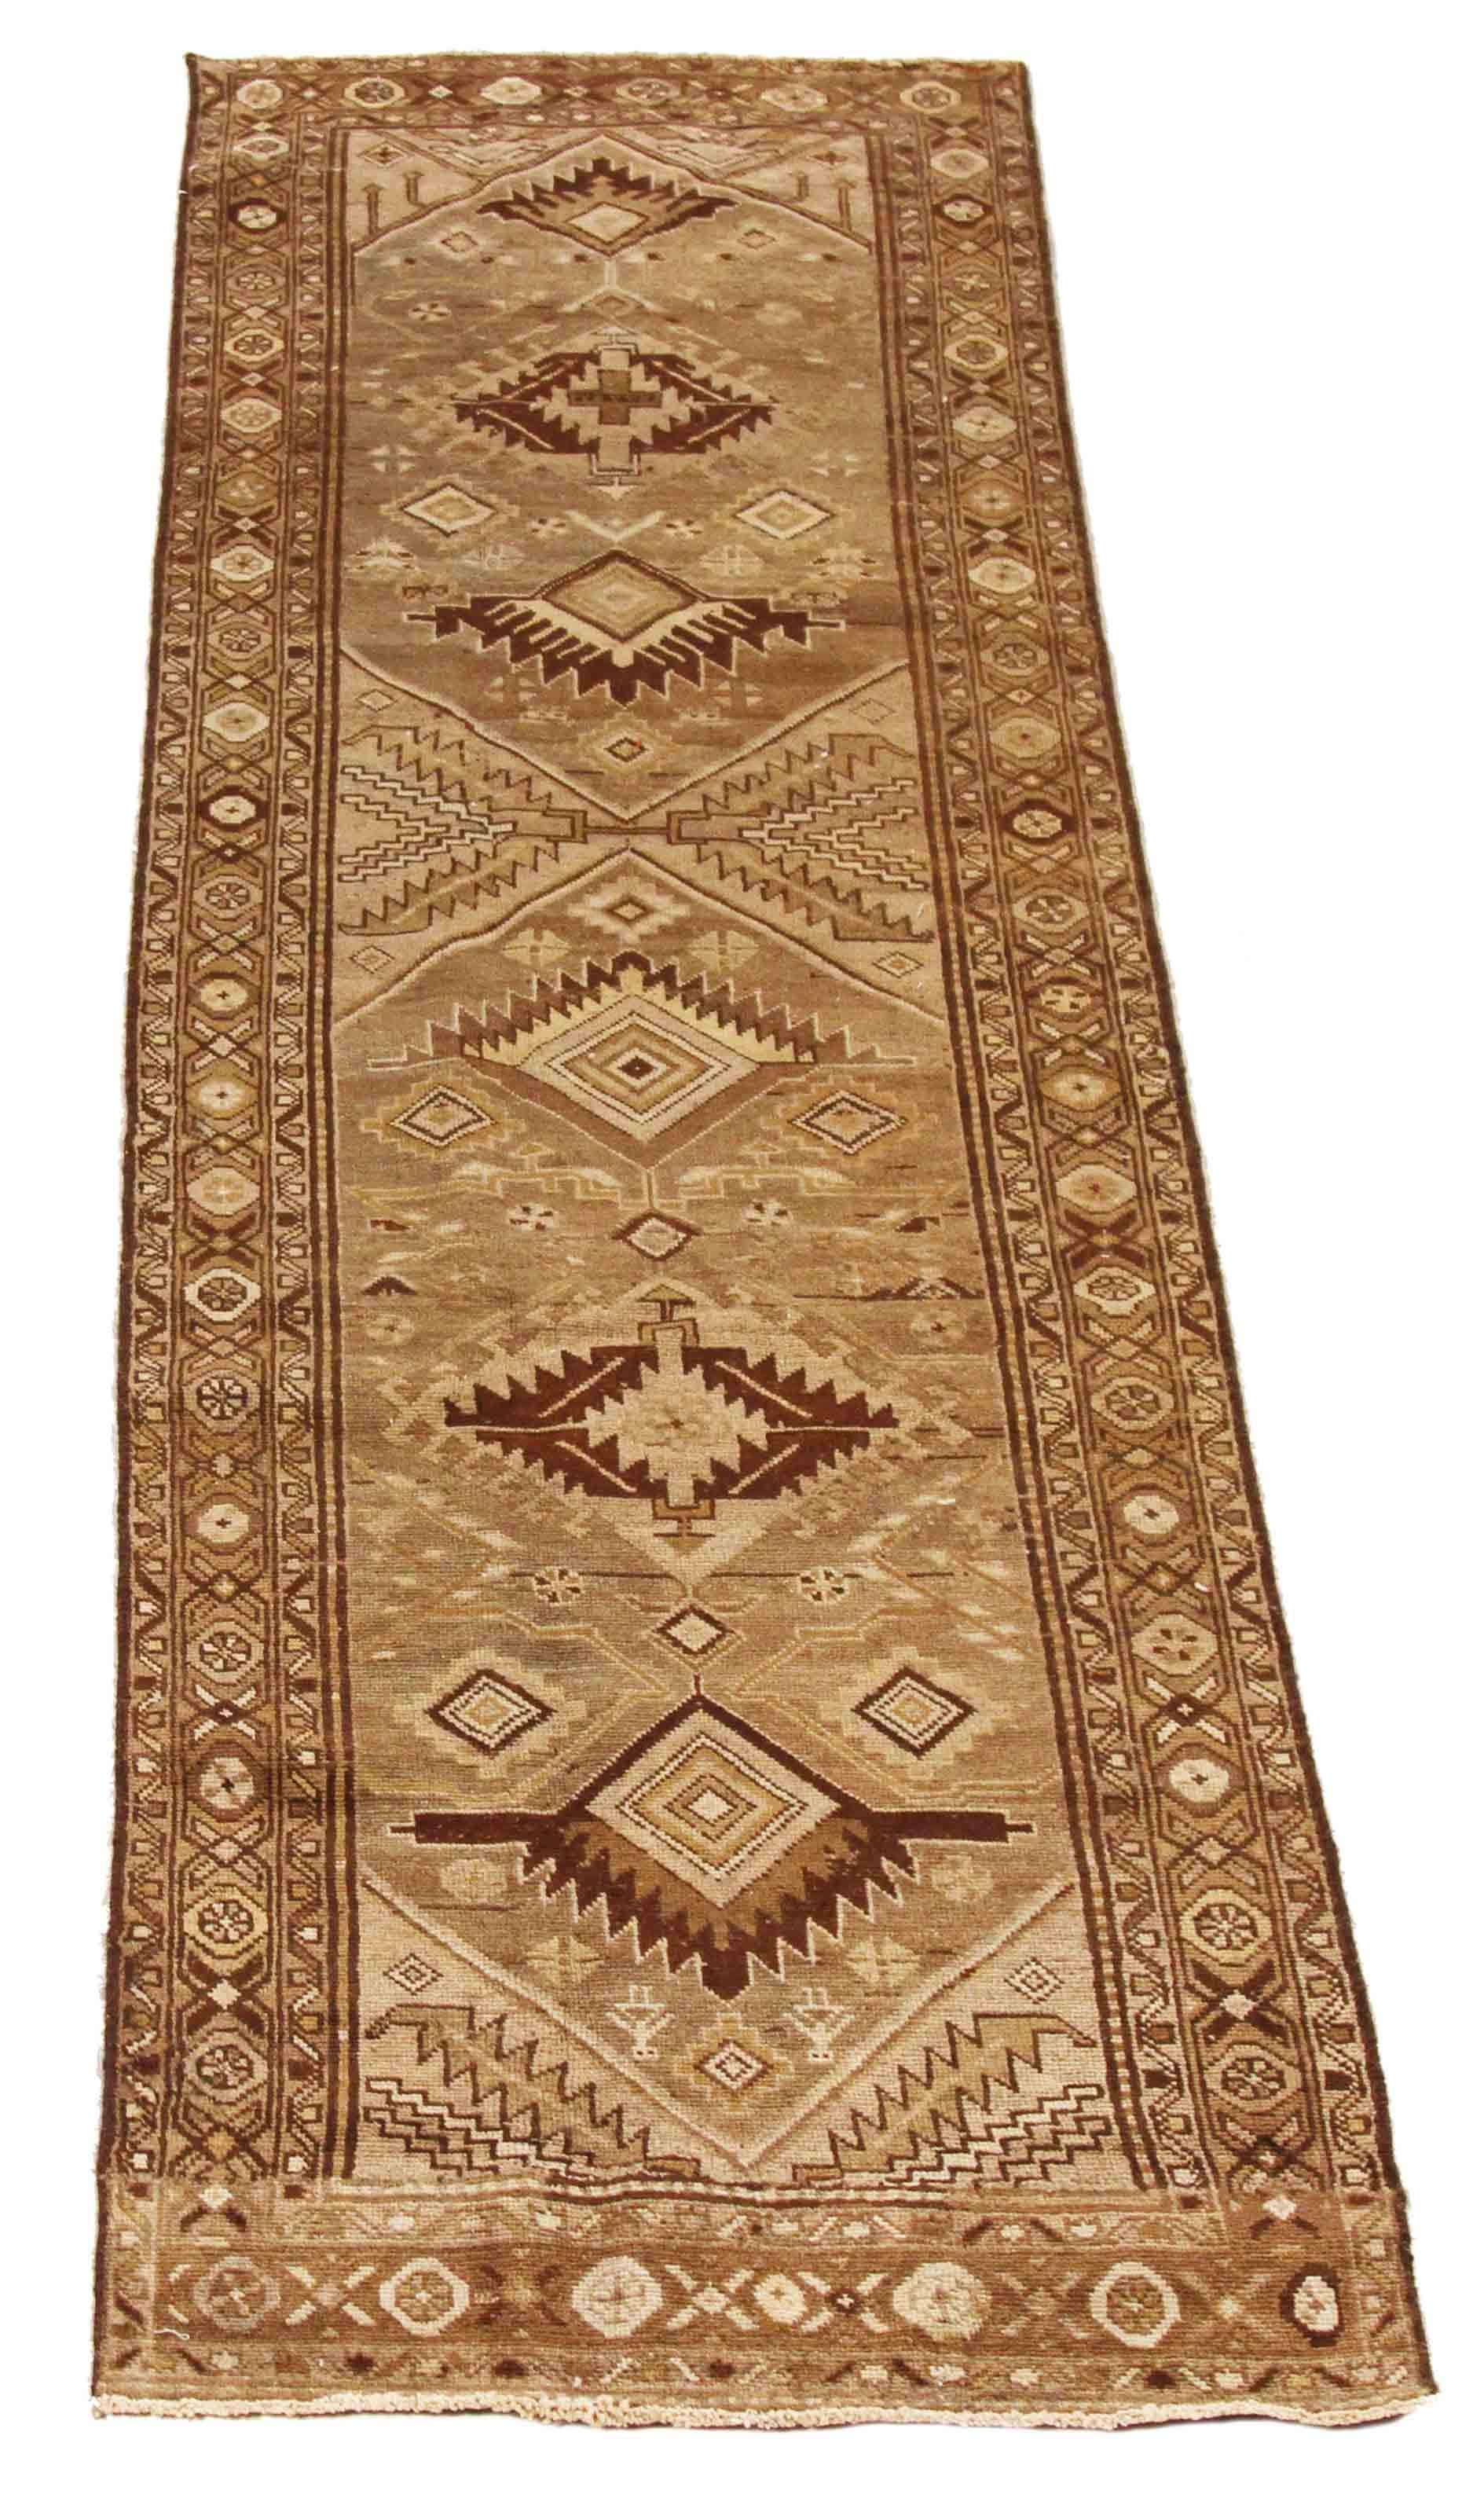 Mid-20th Century Antique Persian Rug from the 1930s in Captivating Geometric Azerbaijan Design For Sale